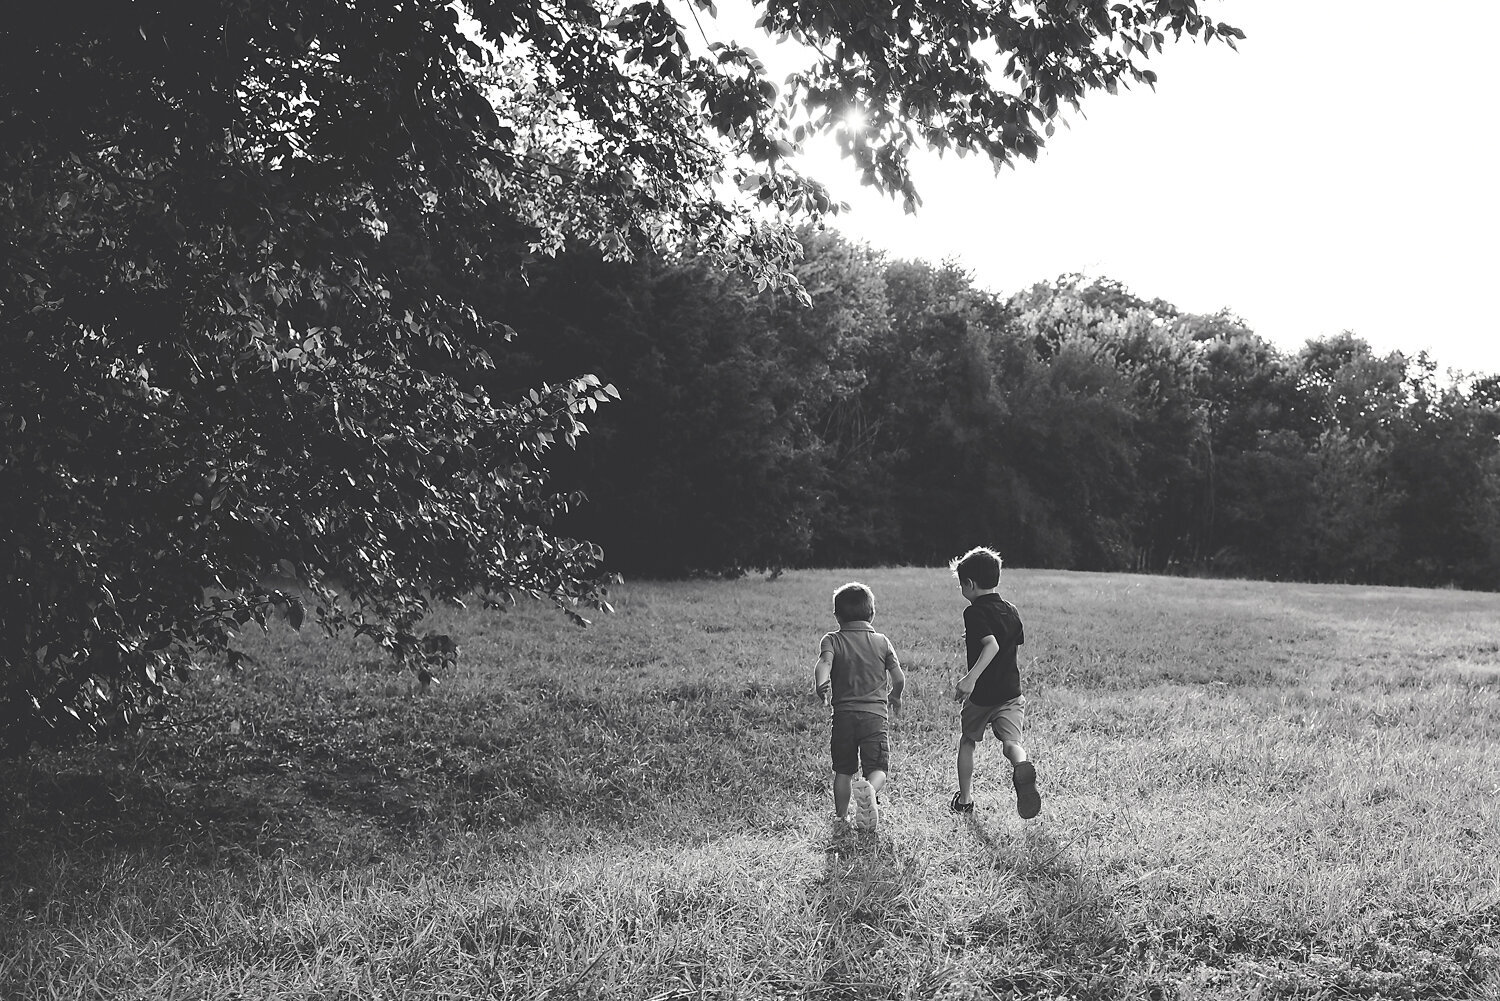 Black and white image of brothers running in a field at sunset with the sun peeking through the trees.